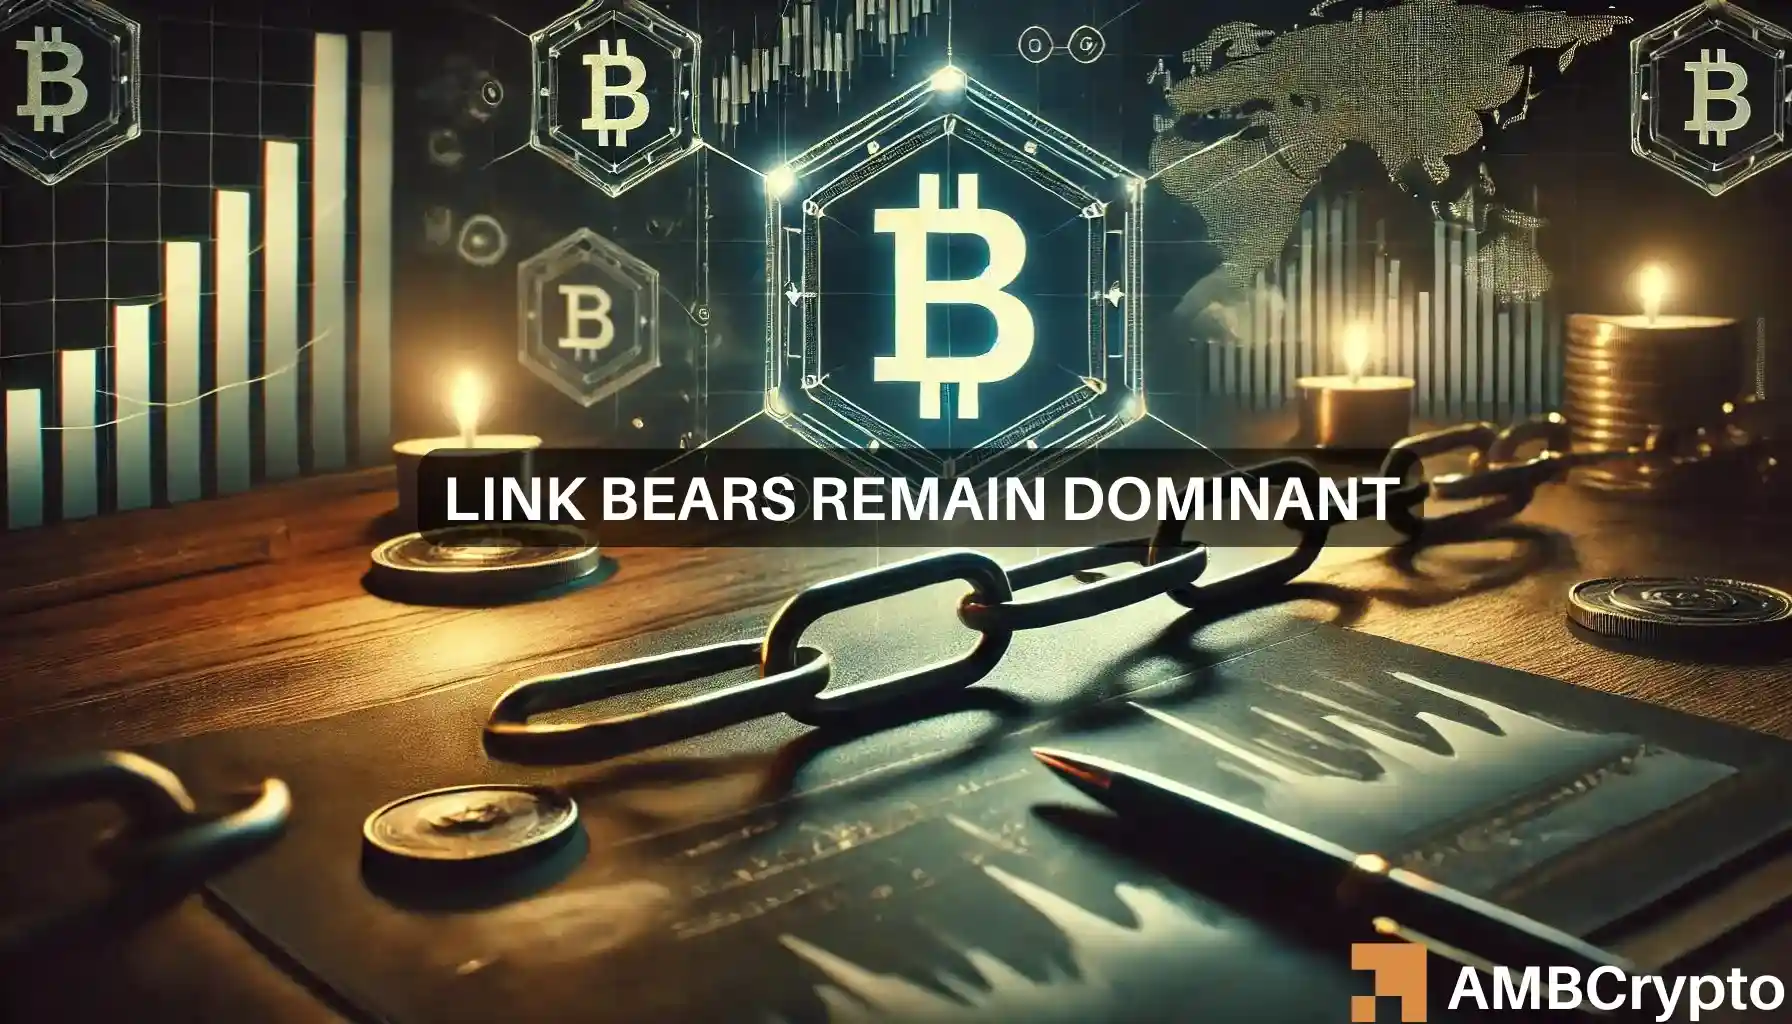 Chainlink price prediction is bearish in the near-term, but there could be a trend reversal soon